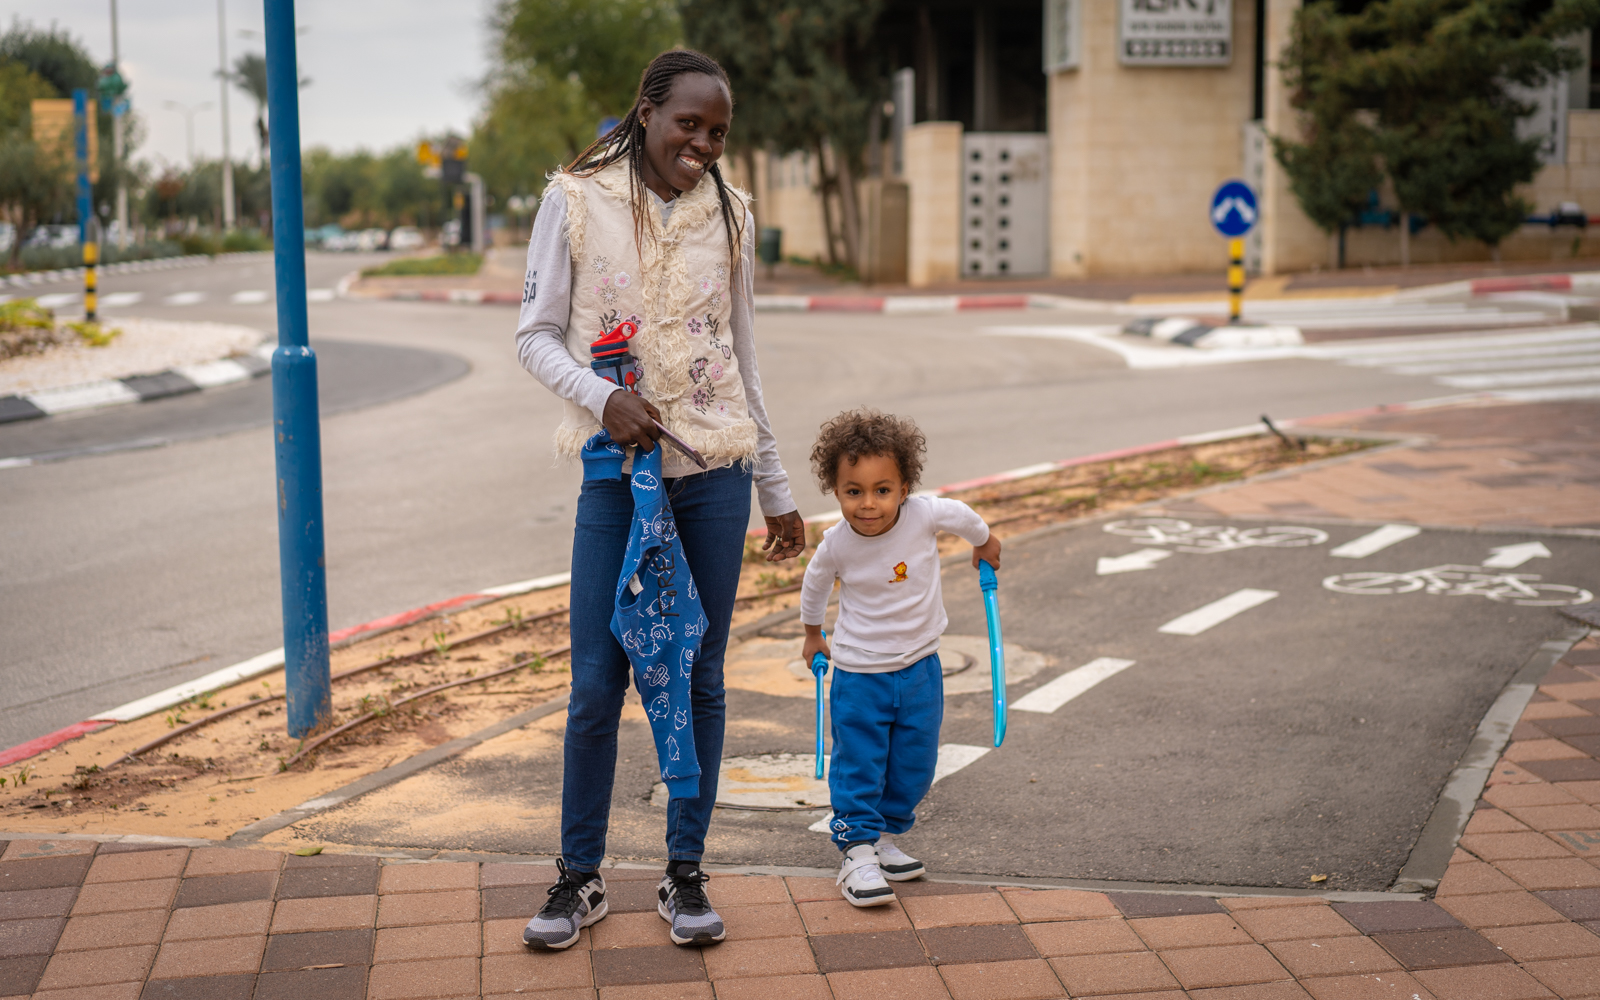 Lonah Chemtai Salpeter with her son, Roy, outside their home in Shoham, central Israel, December 9, 2018. (Luke Tress/Times of Israel)